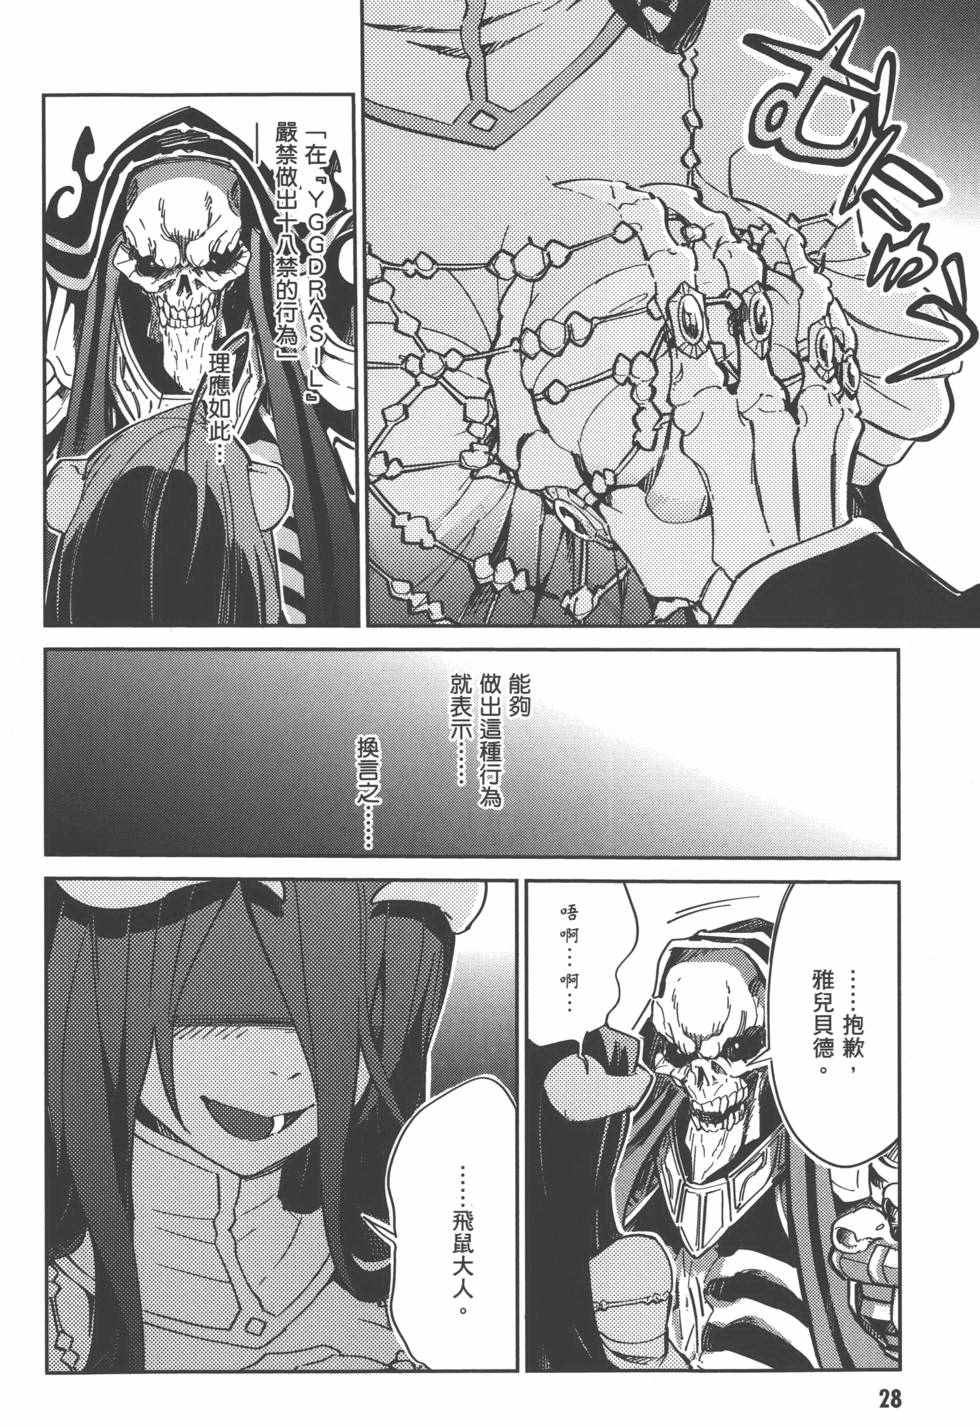 OVERLORD - 第1卷(1/4) - 6